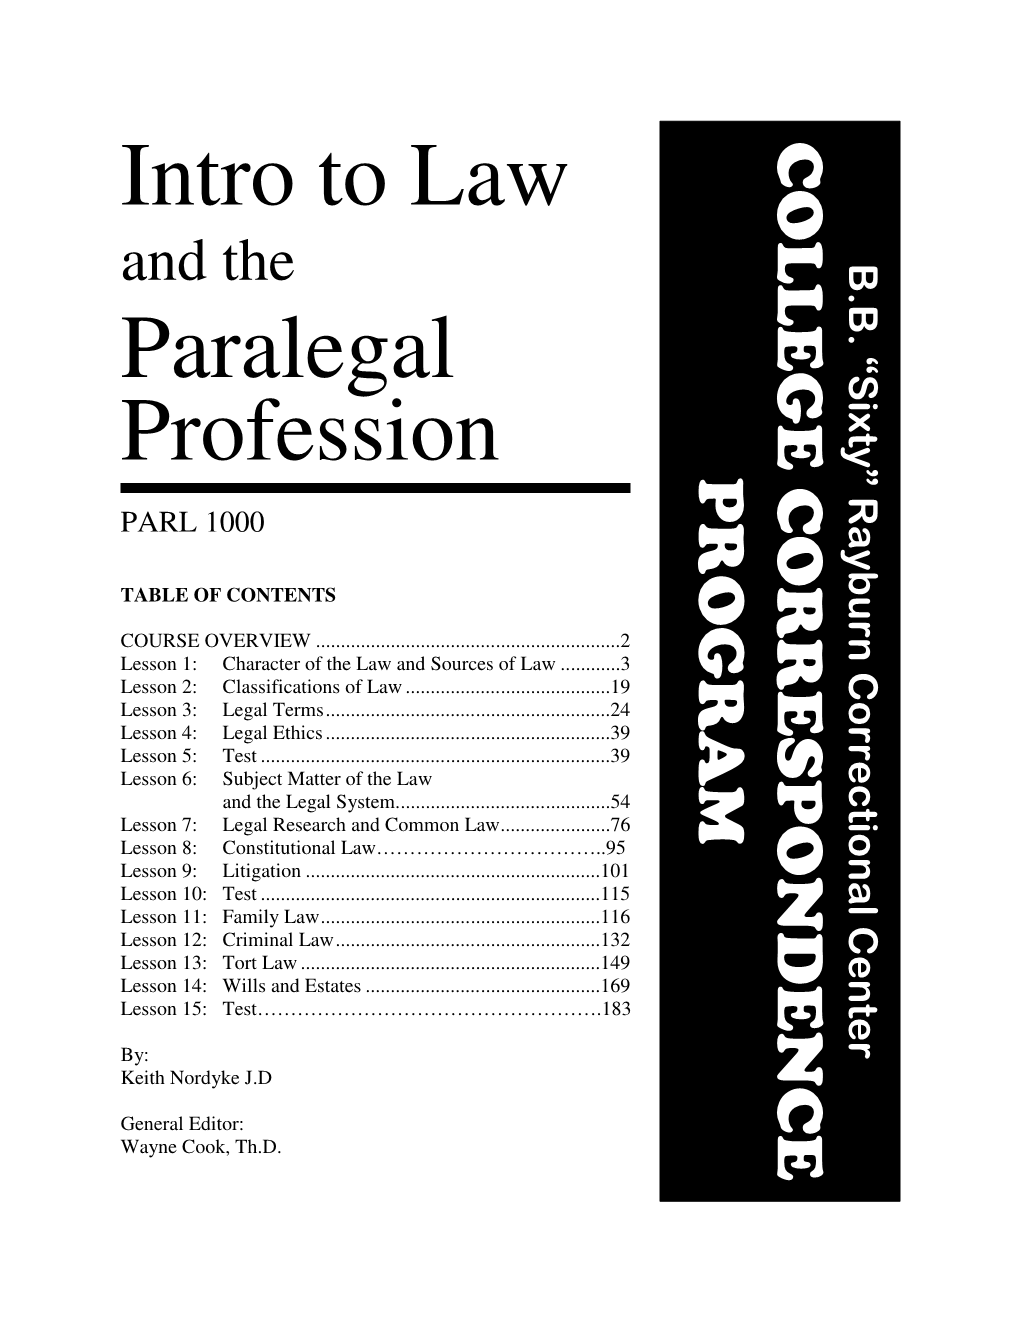 Intro to Law Paralegal Profession